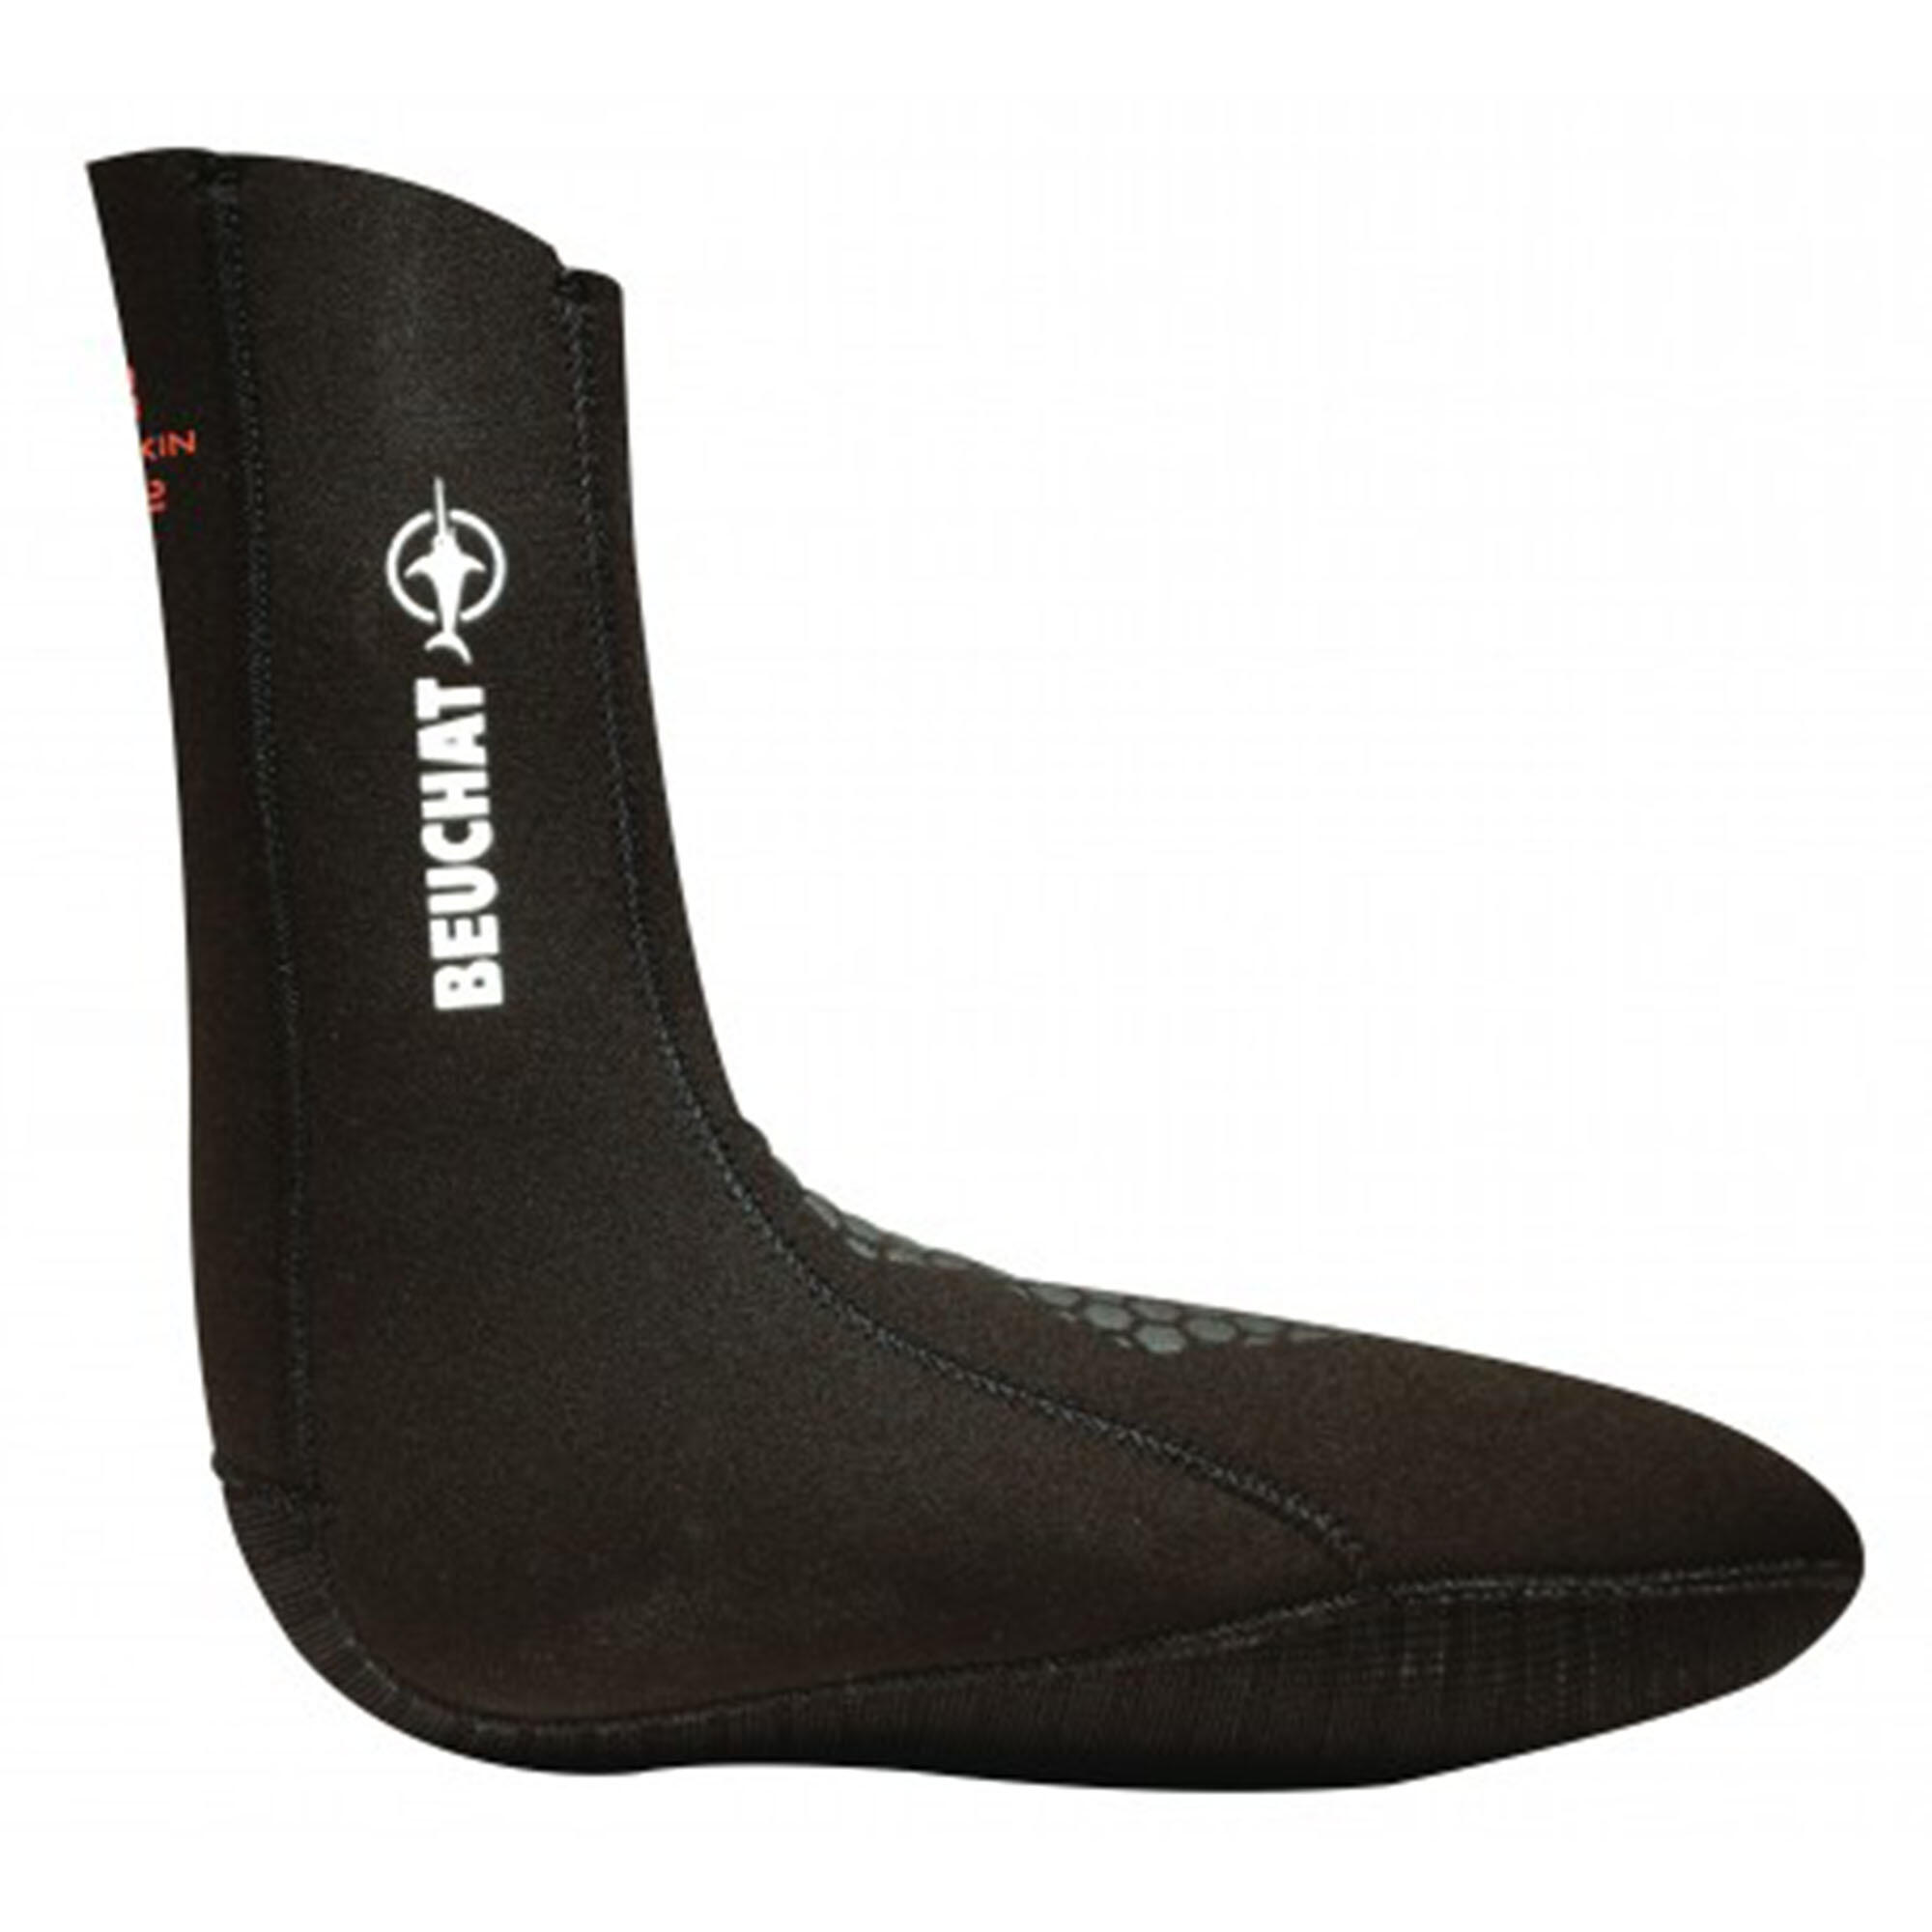 BEUCHAT SIROCCO ELITE SMOOTH 5 MM SOCKS FOR UNDERWATER SPEARFISHING